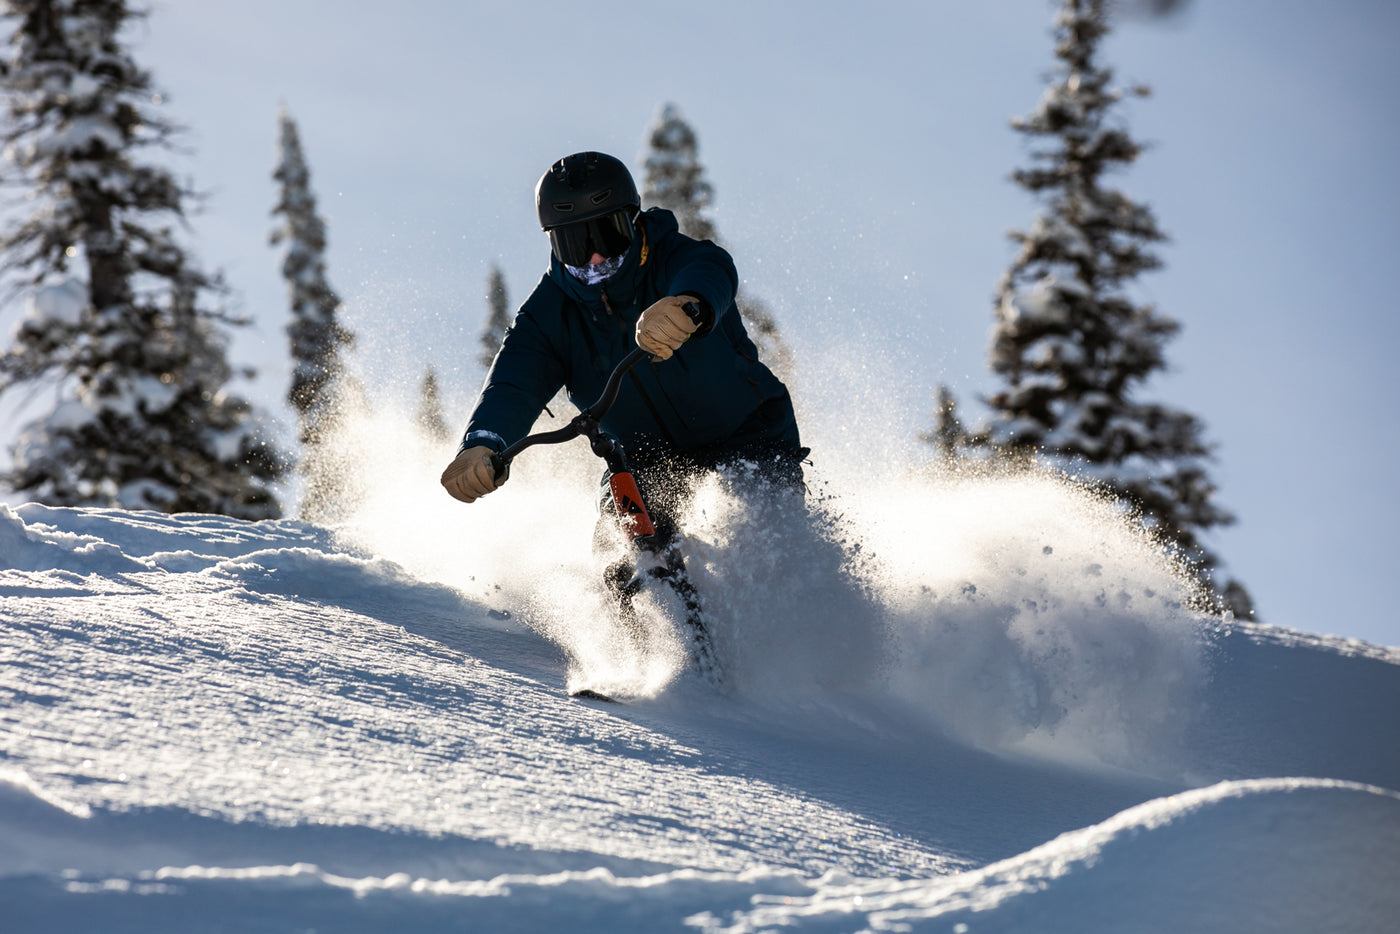 5 New Action Sport Snow Activities To Try This Winter – SNO-GO Ski